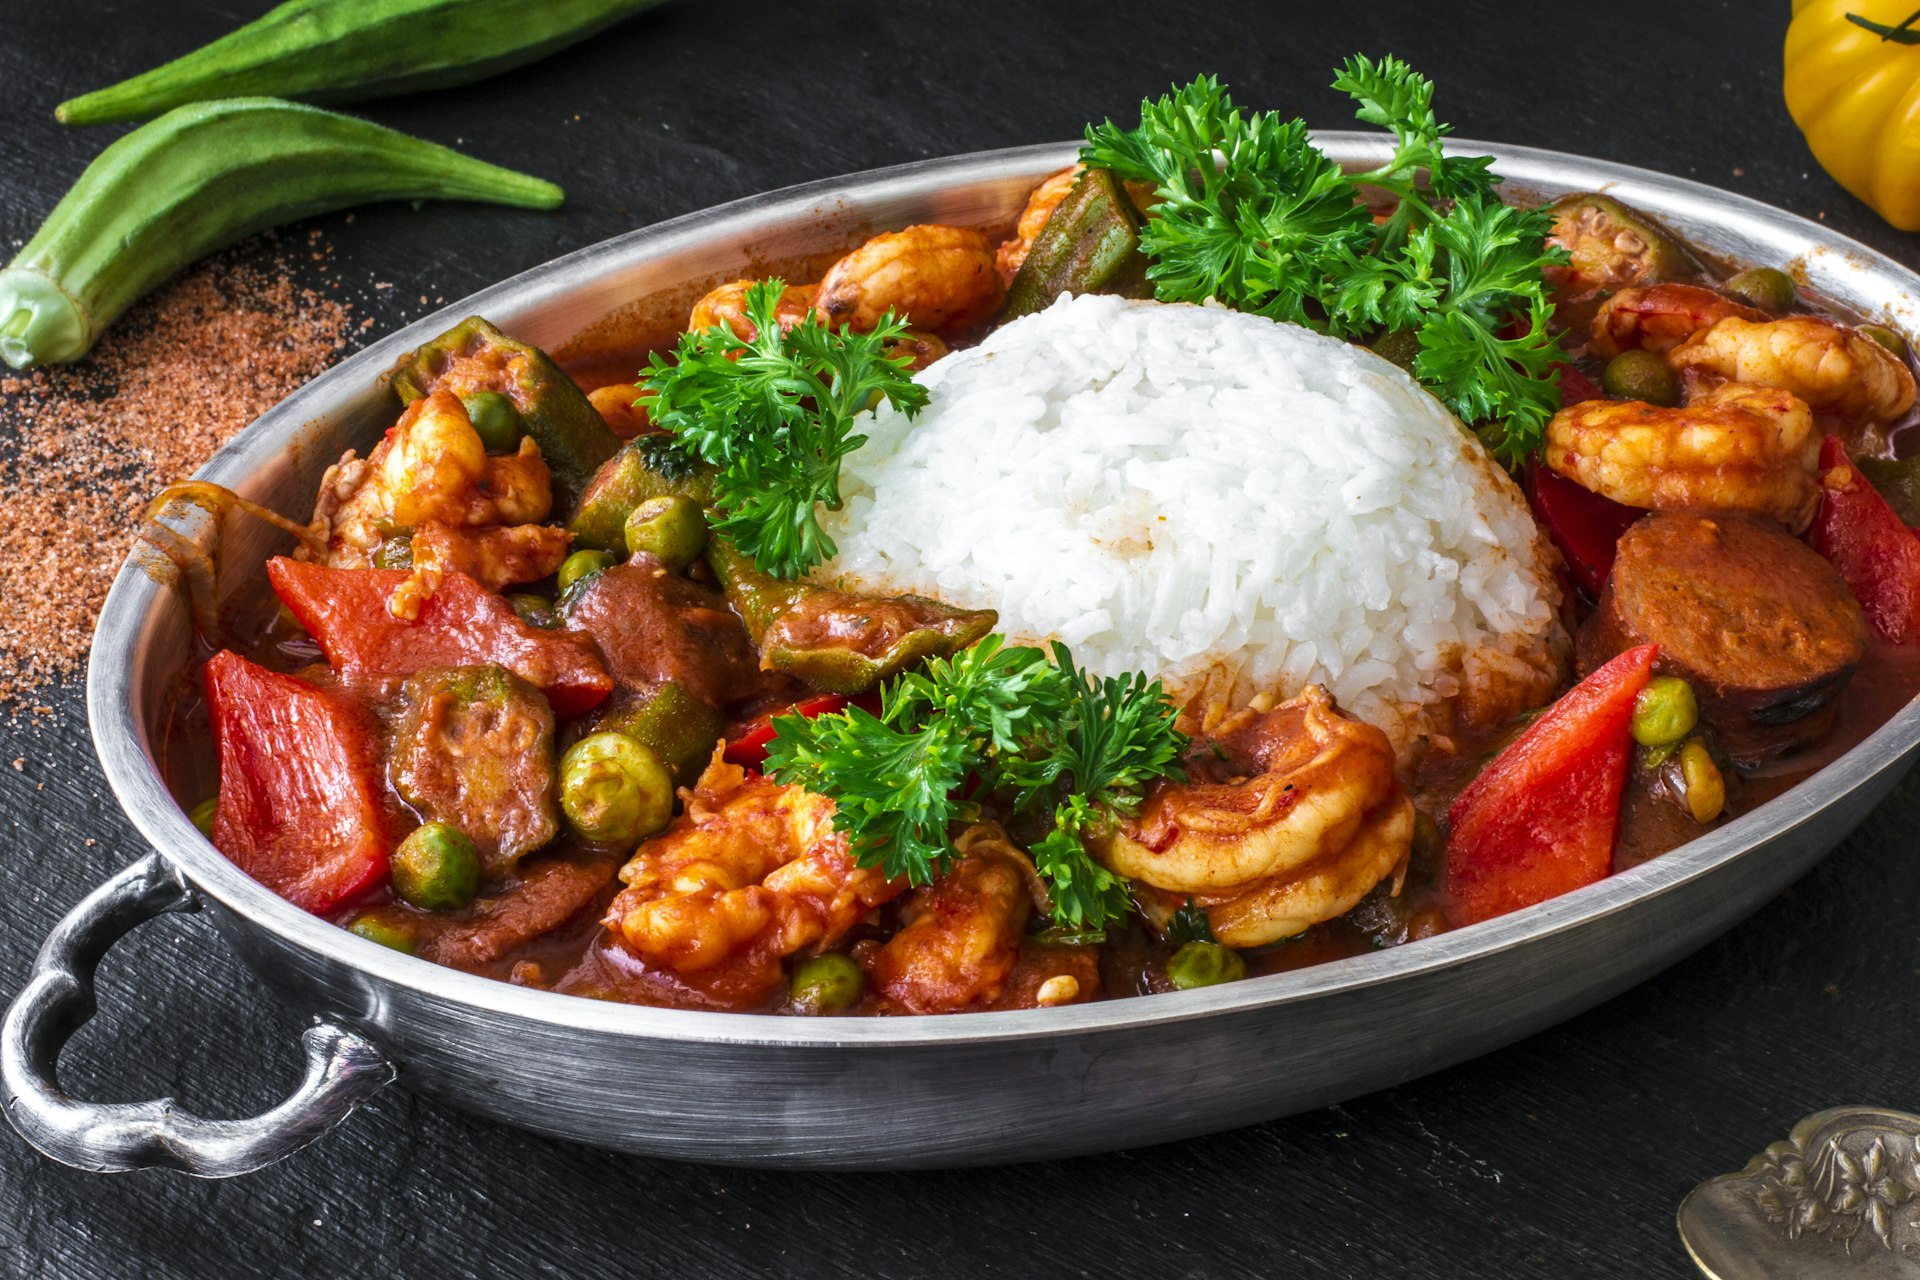 A traditional seafood gumbo with sausages, shrimps, vegetables and Cajun spices